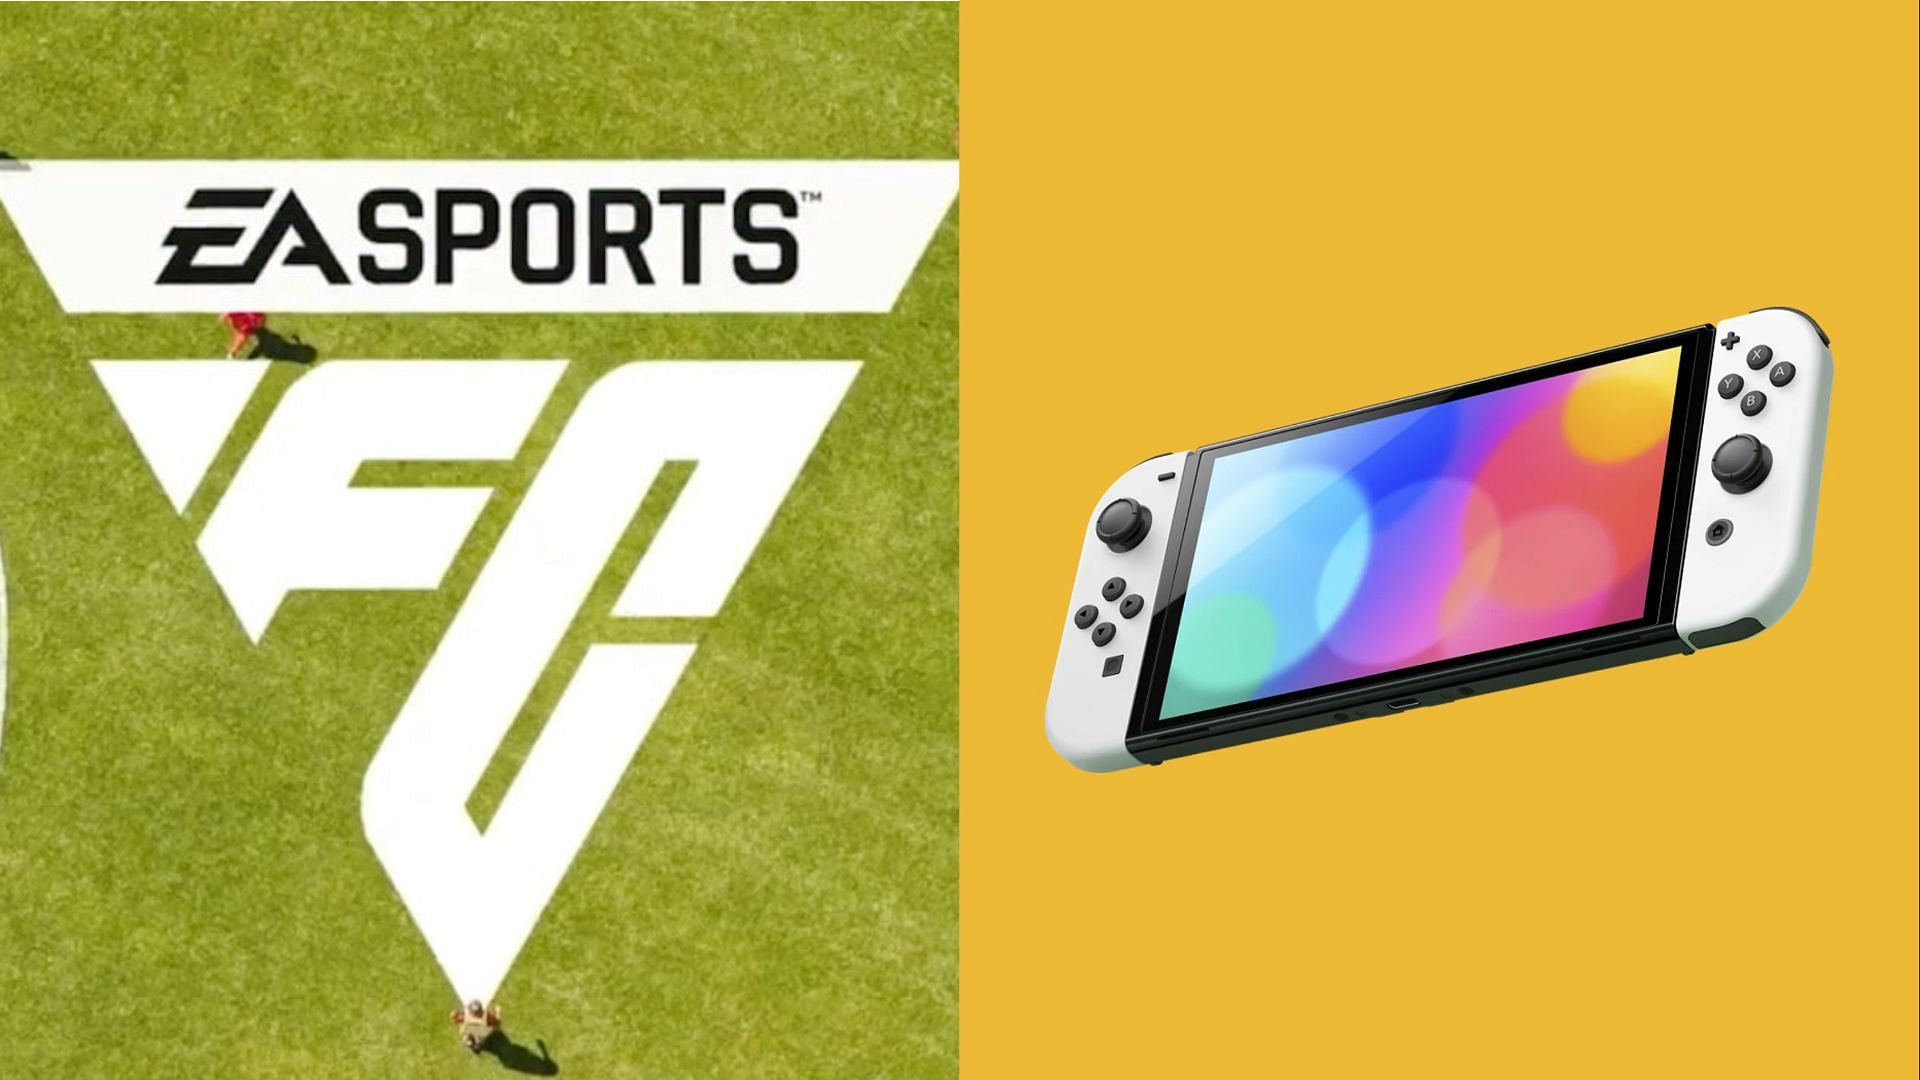 EA Sports FC could finally be what FIFA 23 failed to be on the Nintendo Switch (Images via EA Sports, Nintendo)